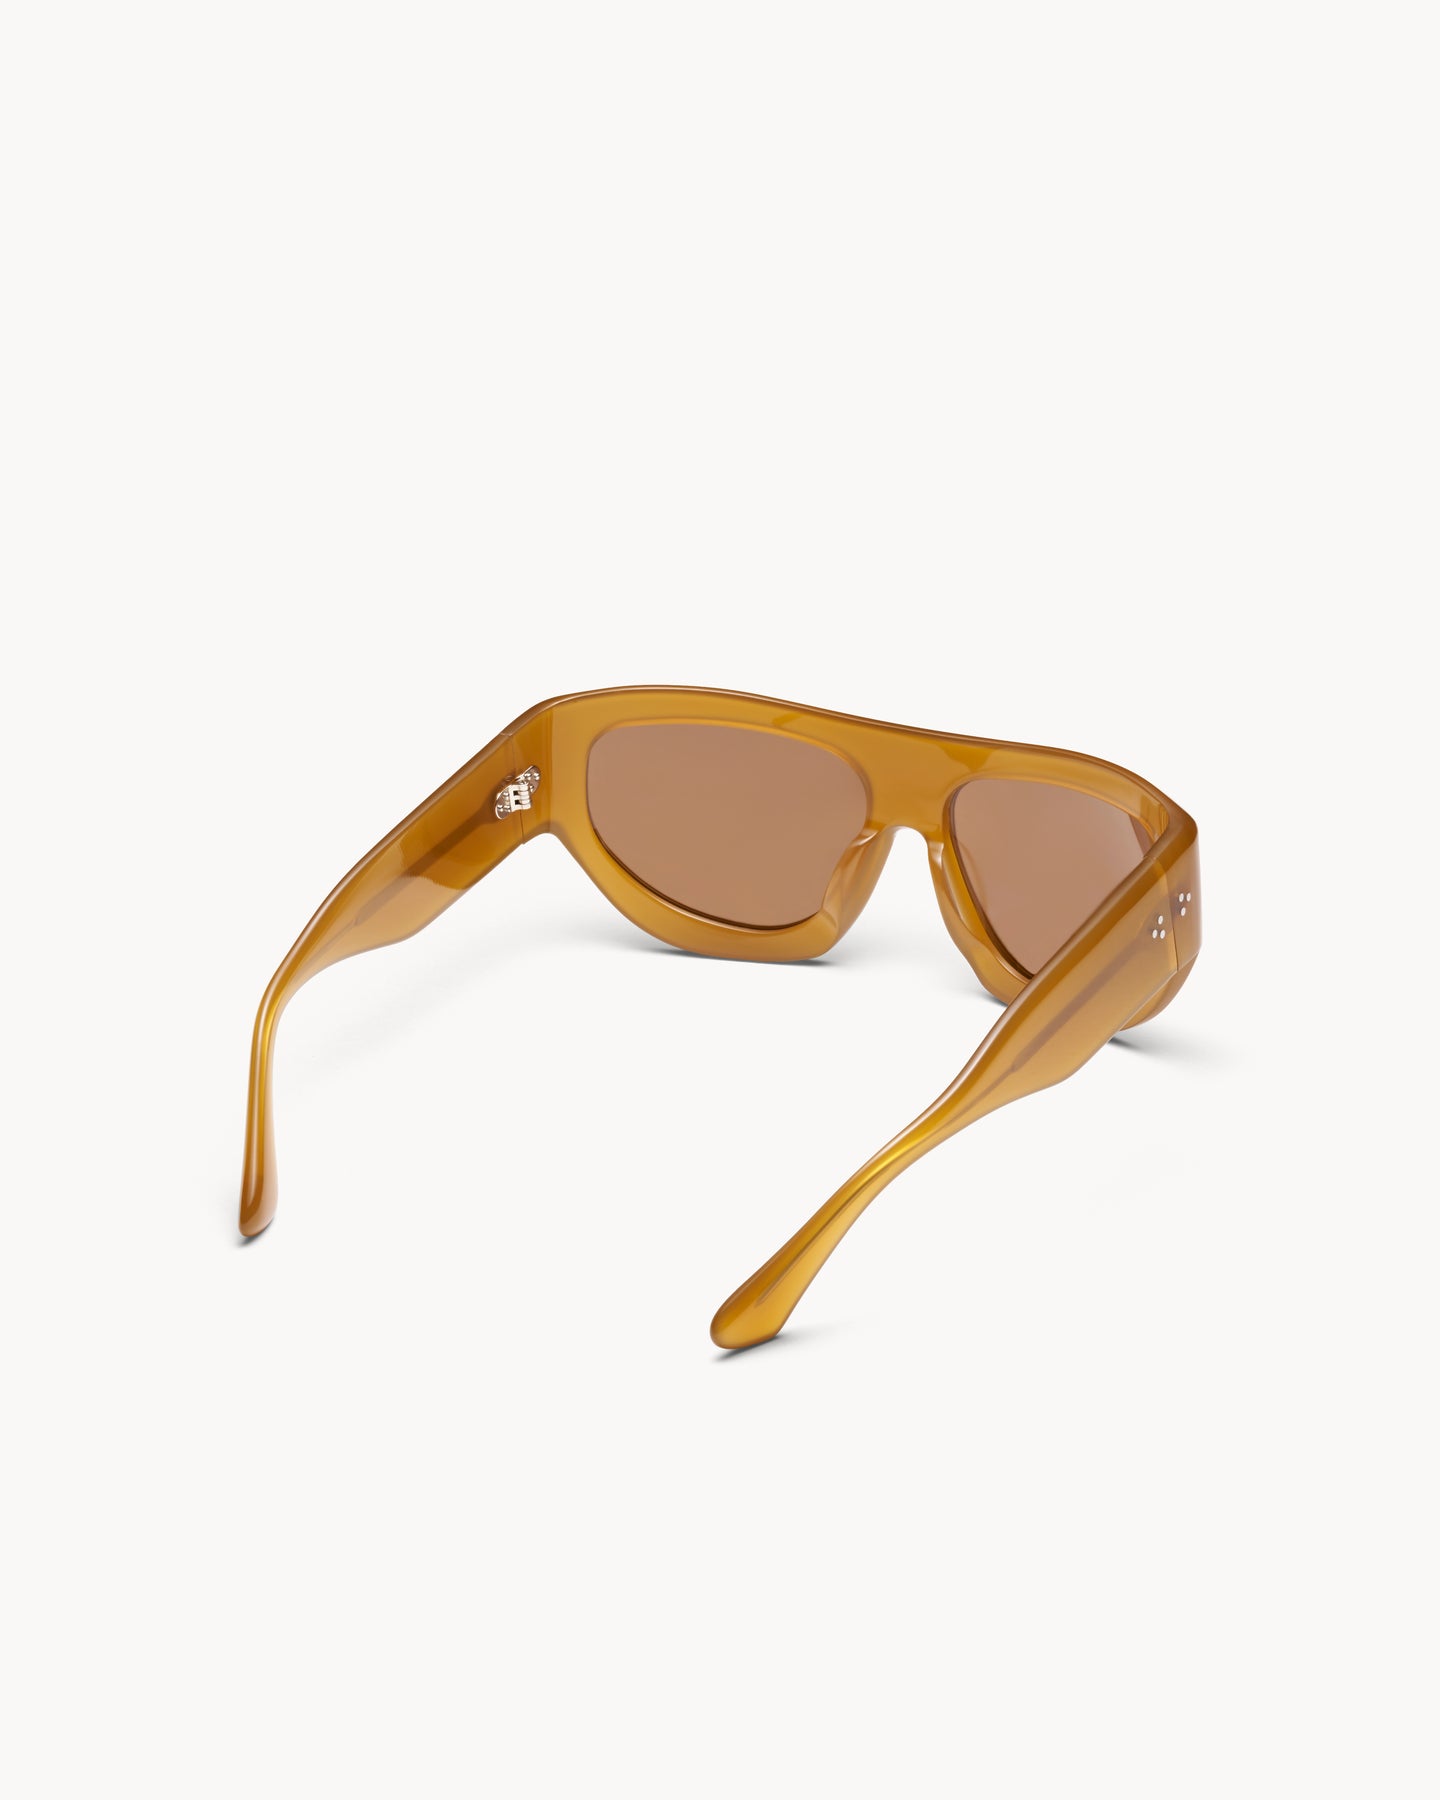 Port Tanger Dost Sunglasses in Yellow Ochra Acetate and Tobacco Lenses 3